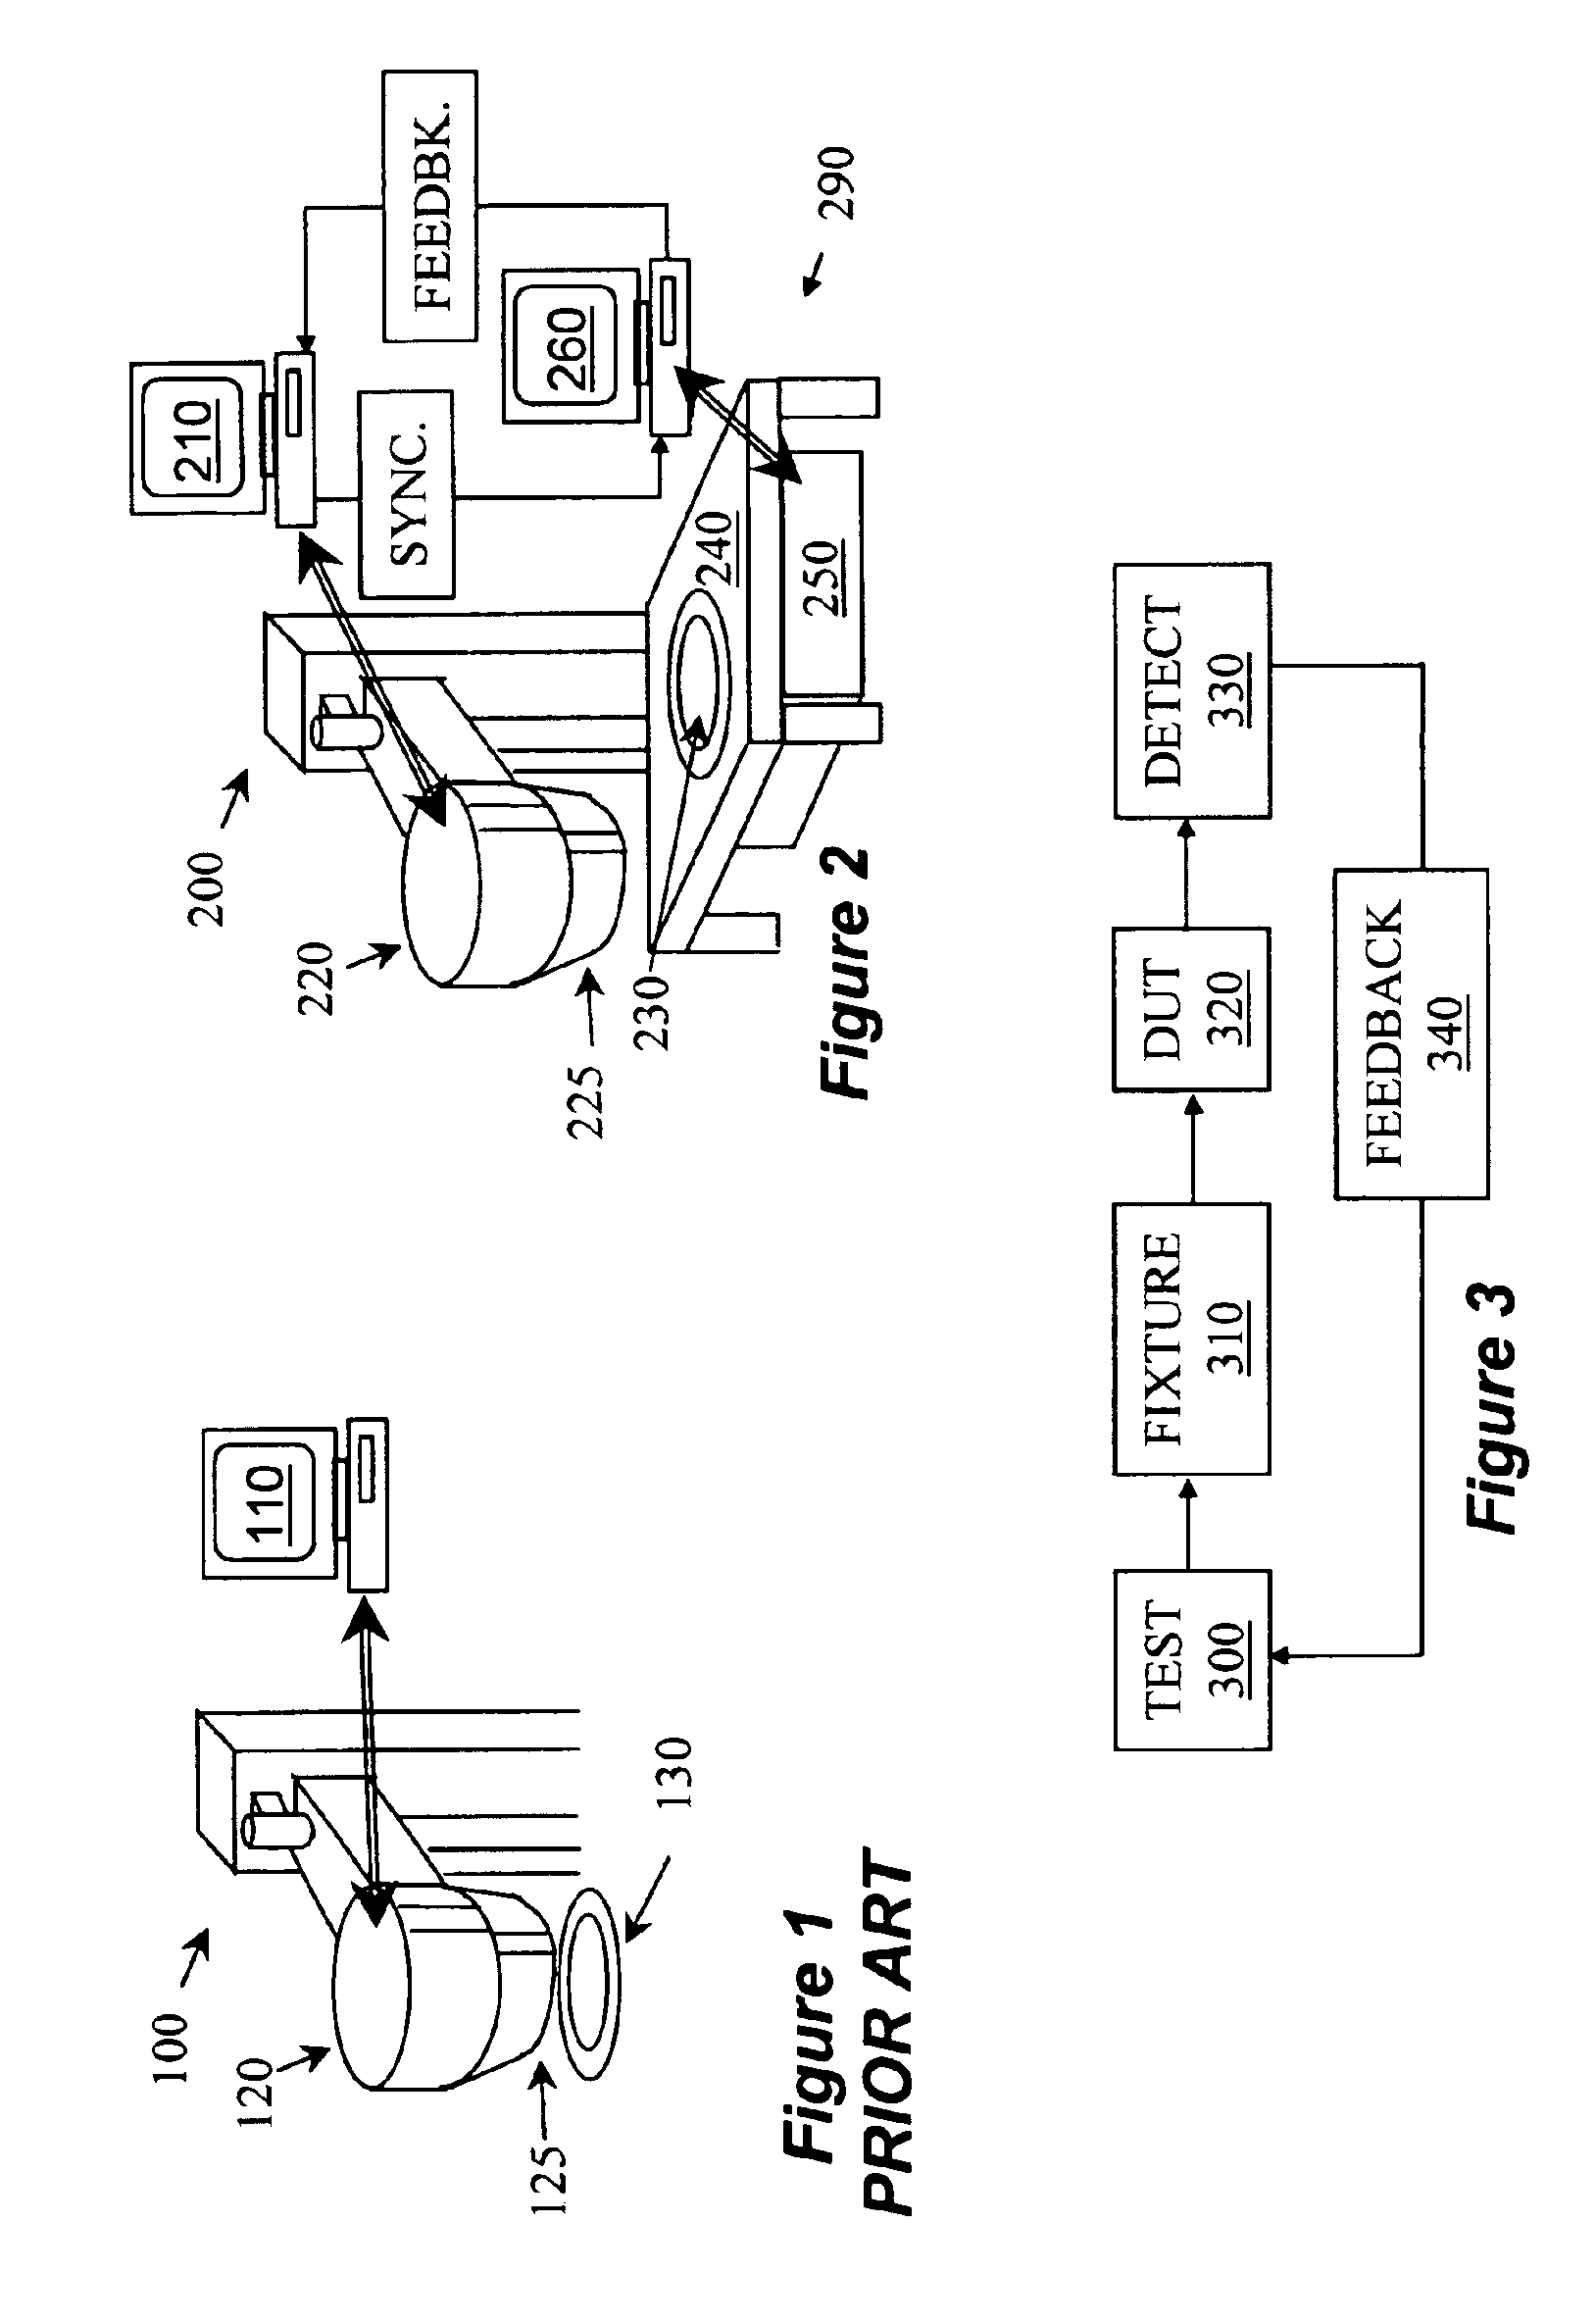 System and method for calibration of testing equipment using device photoemission